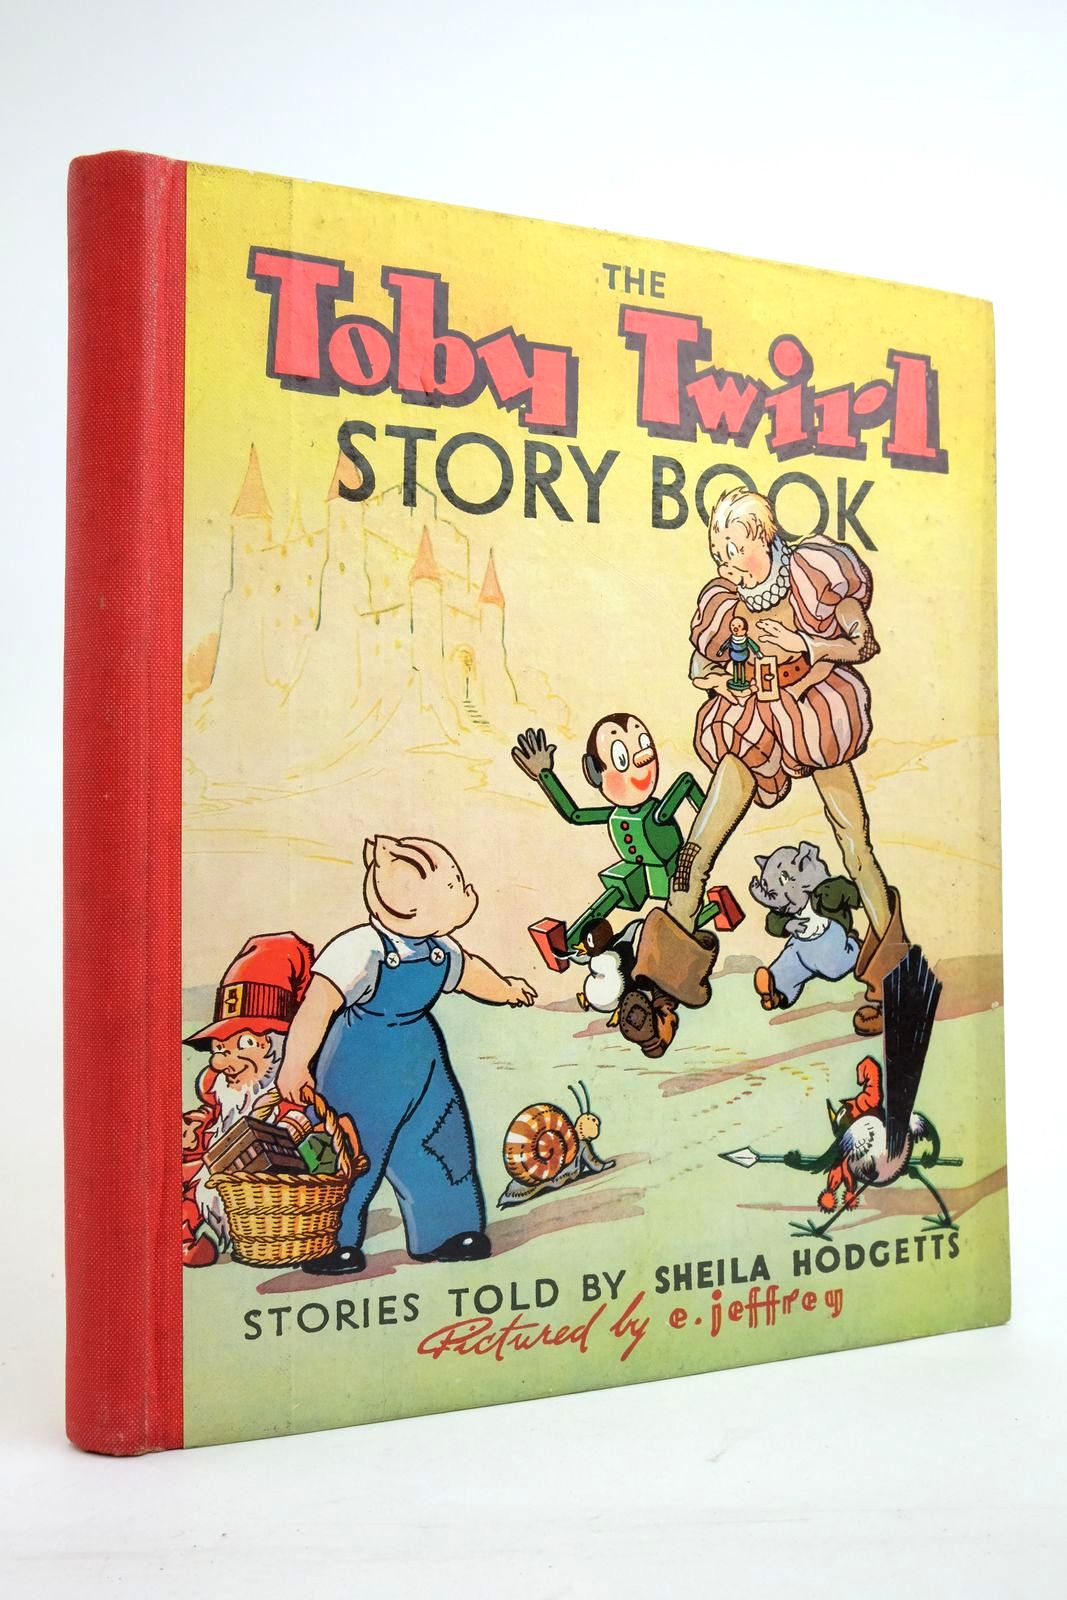 Photo of THE TOBY TWIRL STORY BOOK written by Hodgetts, Sheila illustrated by Jeffrey, E. published by Sampson Low, Marston &amp; Co. Ltd. (STOCK CODE: 2136175)  for sale by Stella & Rose's Books